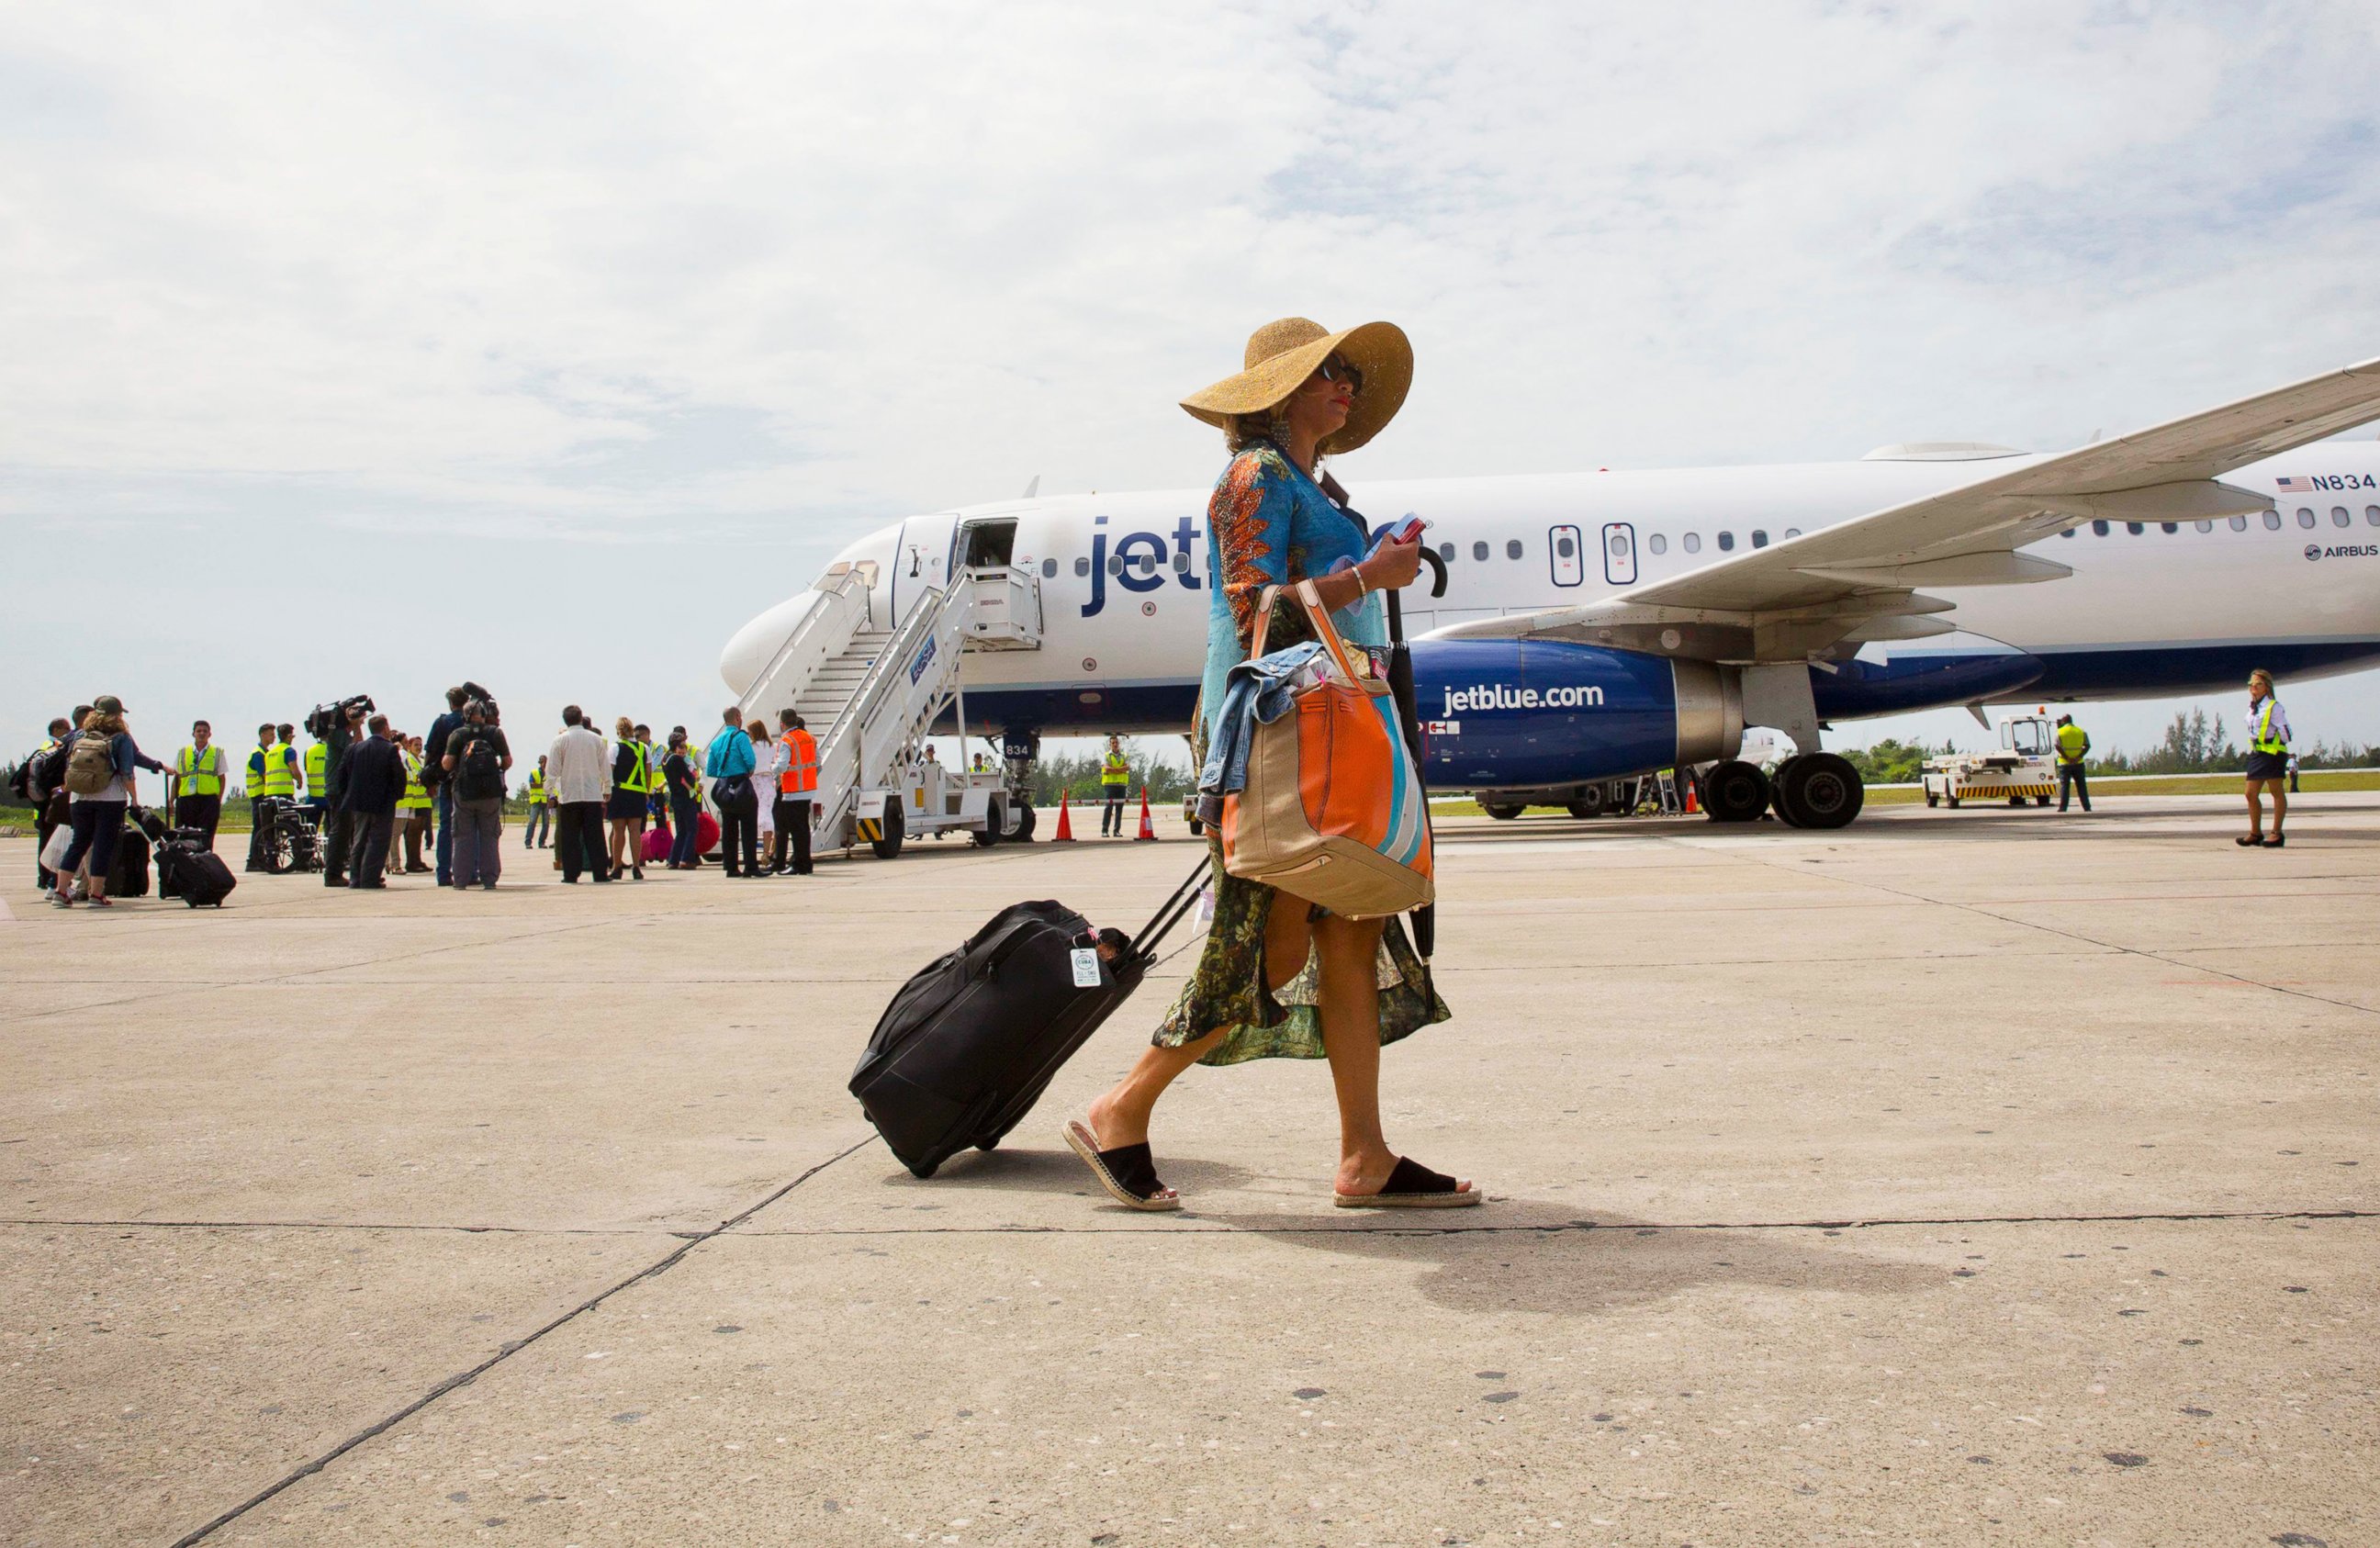 PHOTO: Passengers deplane from JetBlue flight 387, in Santa Clara, Cuba, Aug. 31, 2016. The flight was the first commercial flight between the U.S. and Cuba in more than a half century,